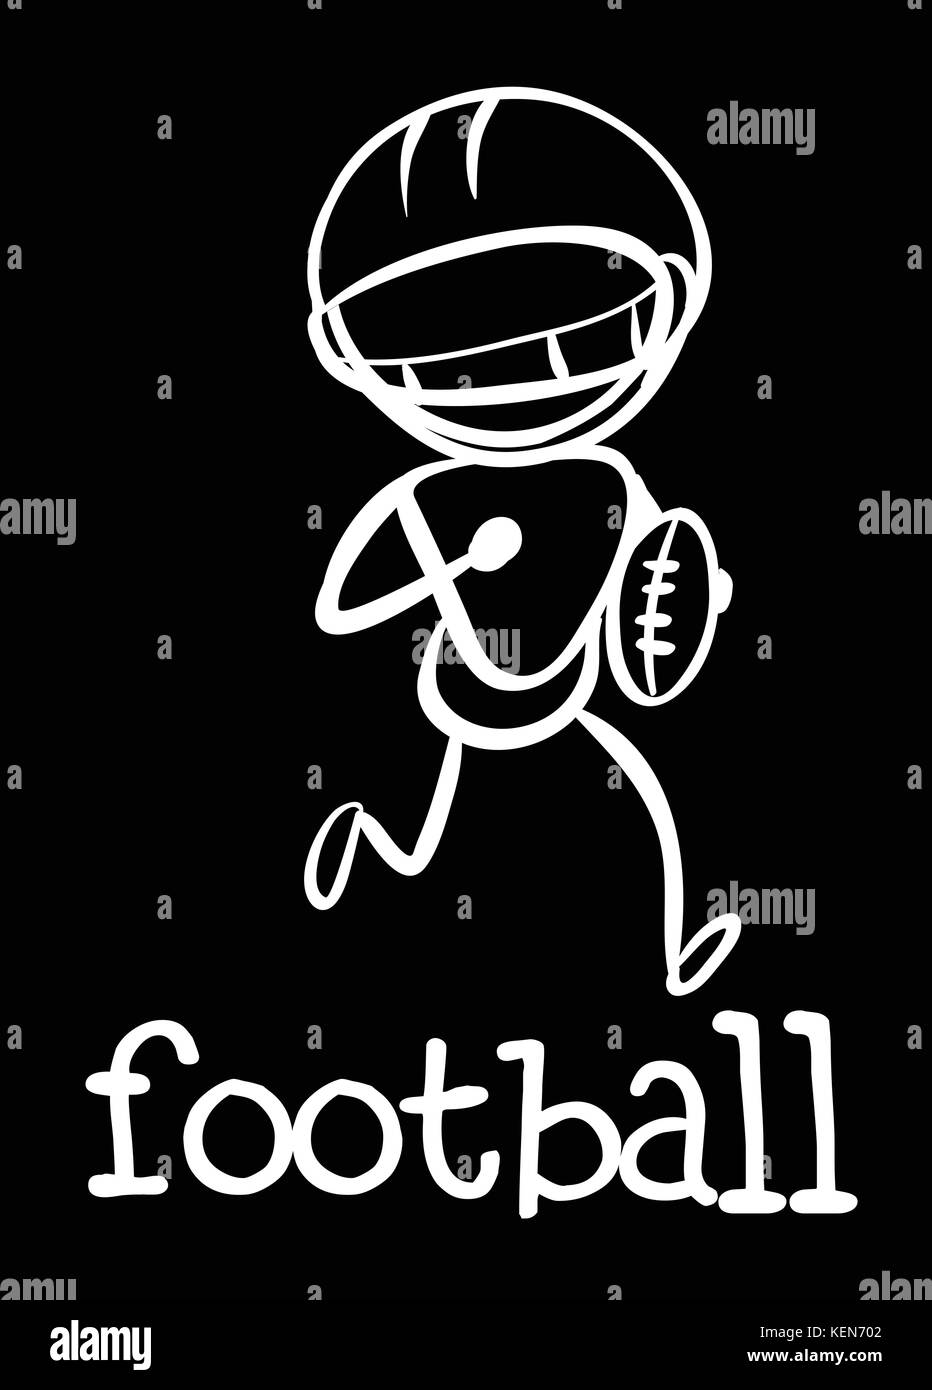 Illustration of a football player on a black background Stock Vector